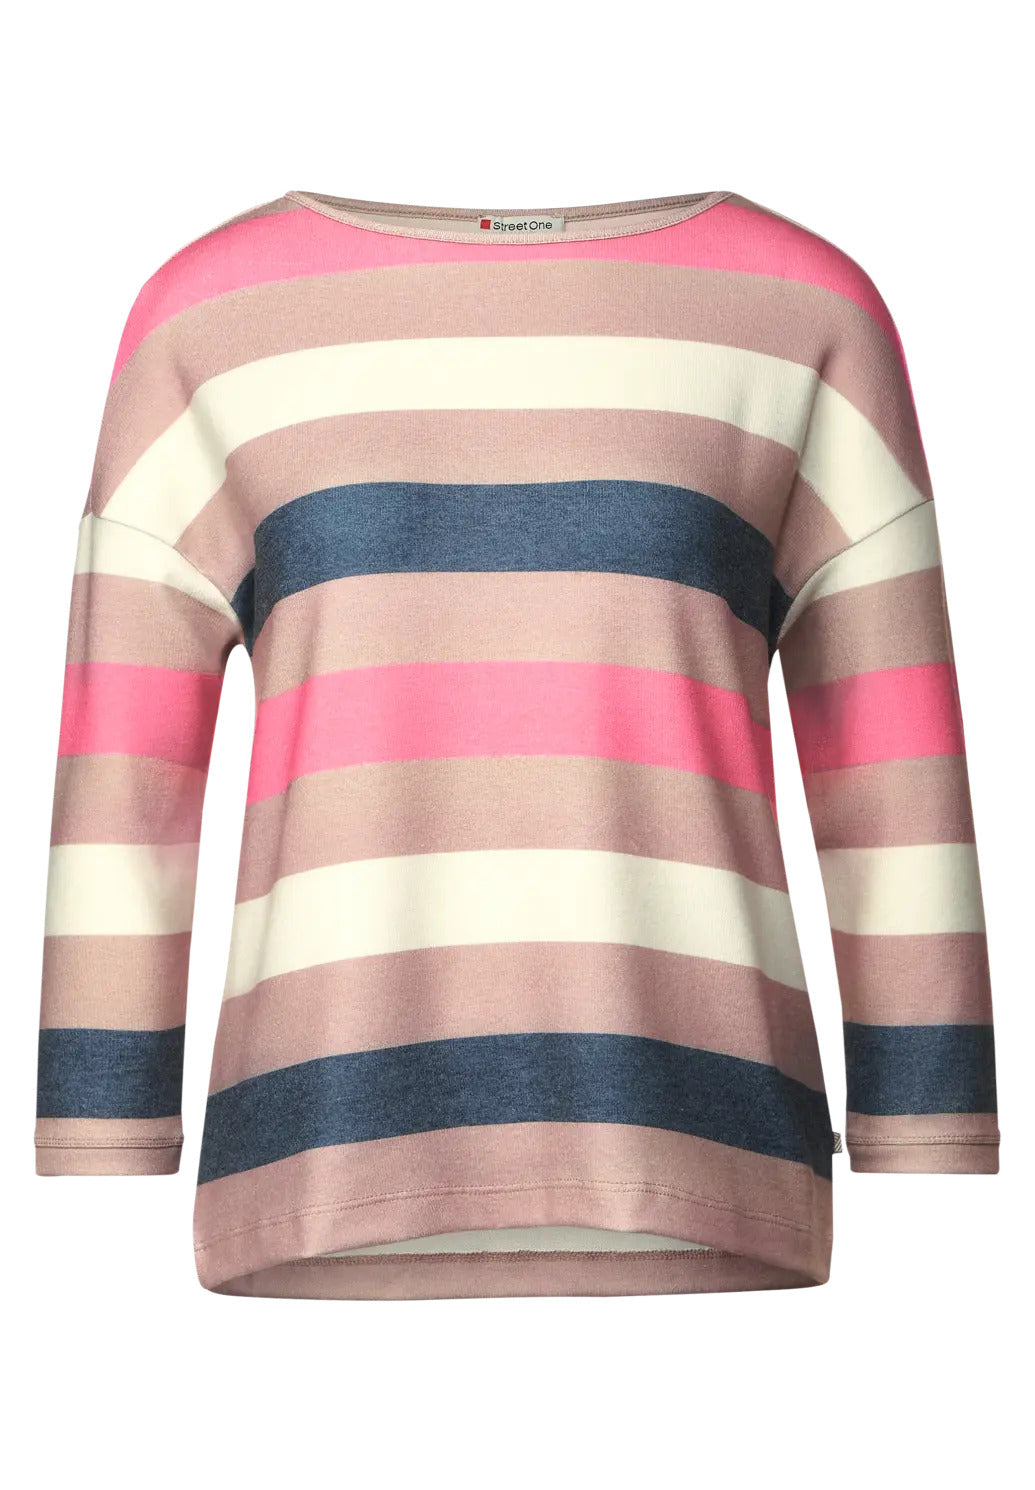 Street One - Striped Top - 319010